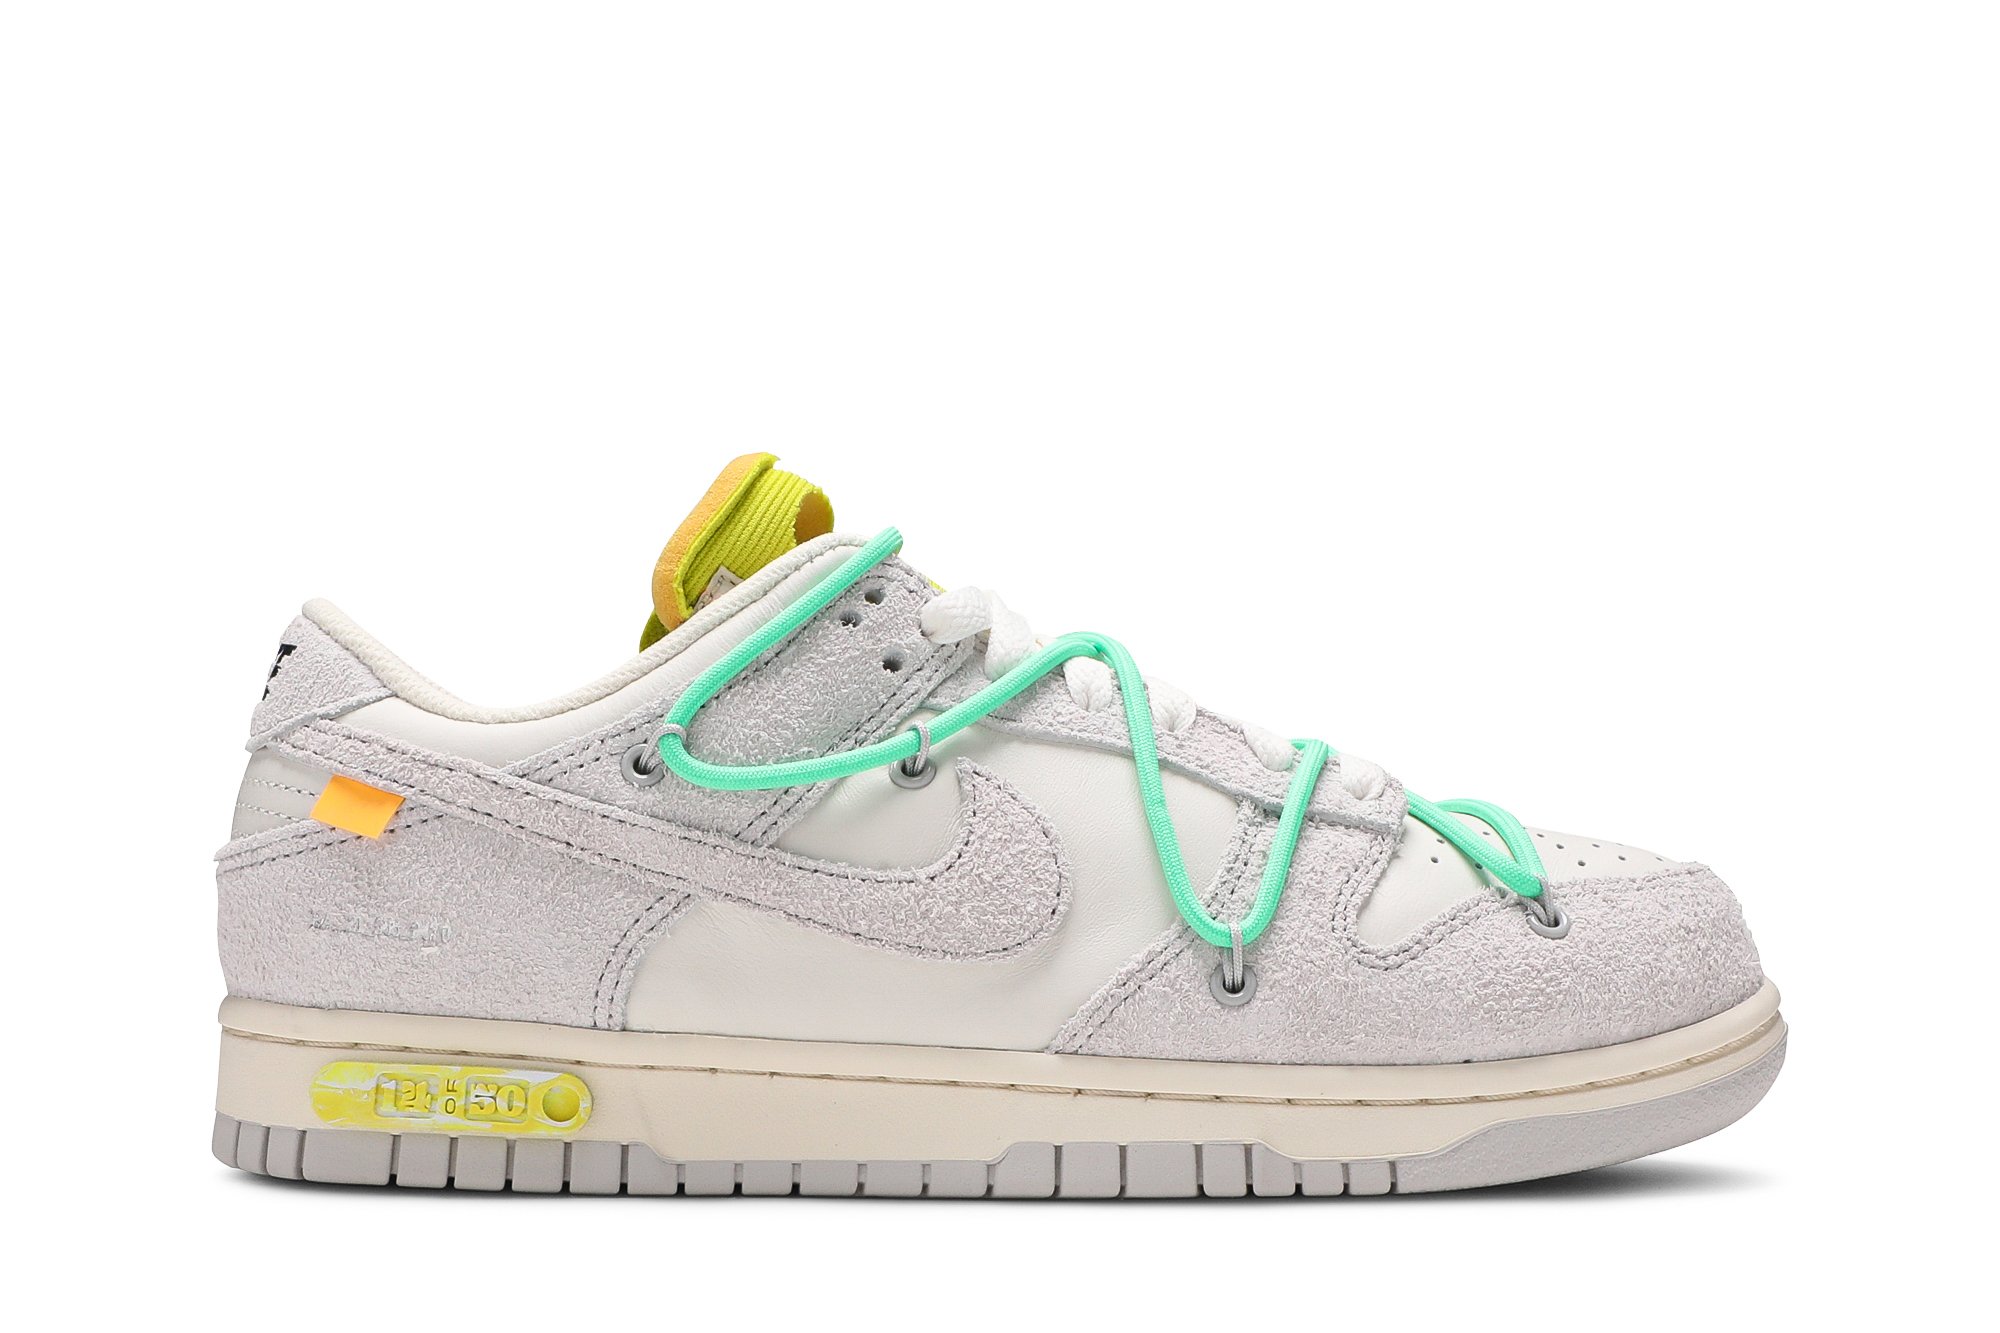 Buy Off-White x Dunk Low 'Lot 14 of 50' - DJ0950 106 - White | GOAT